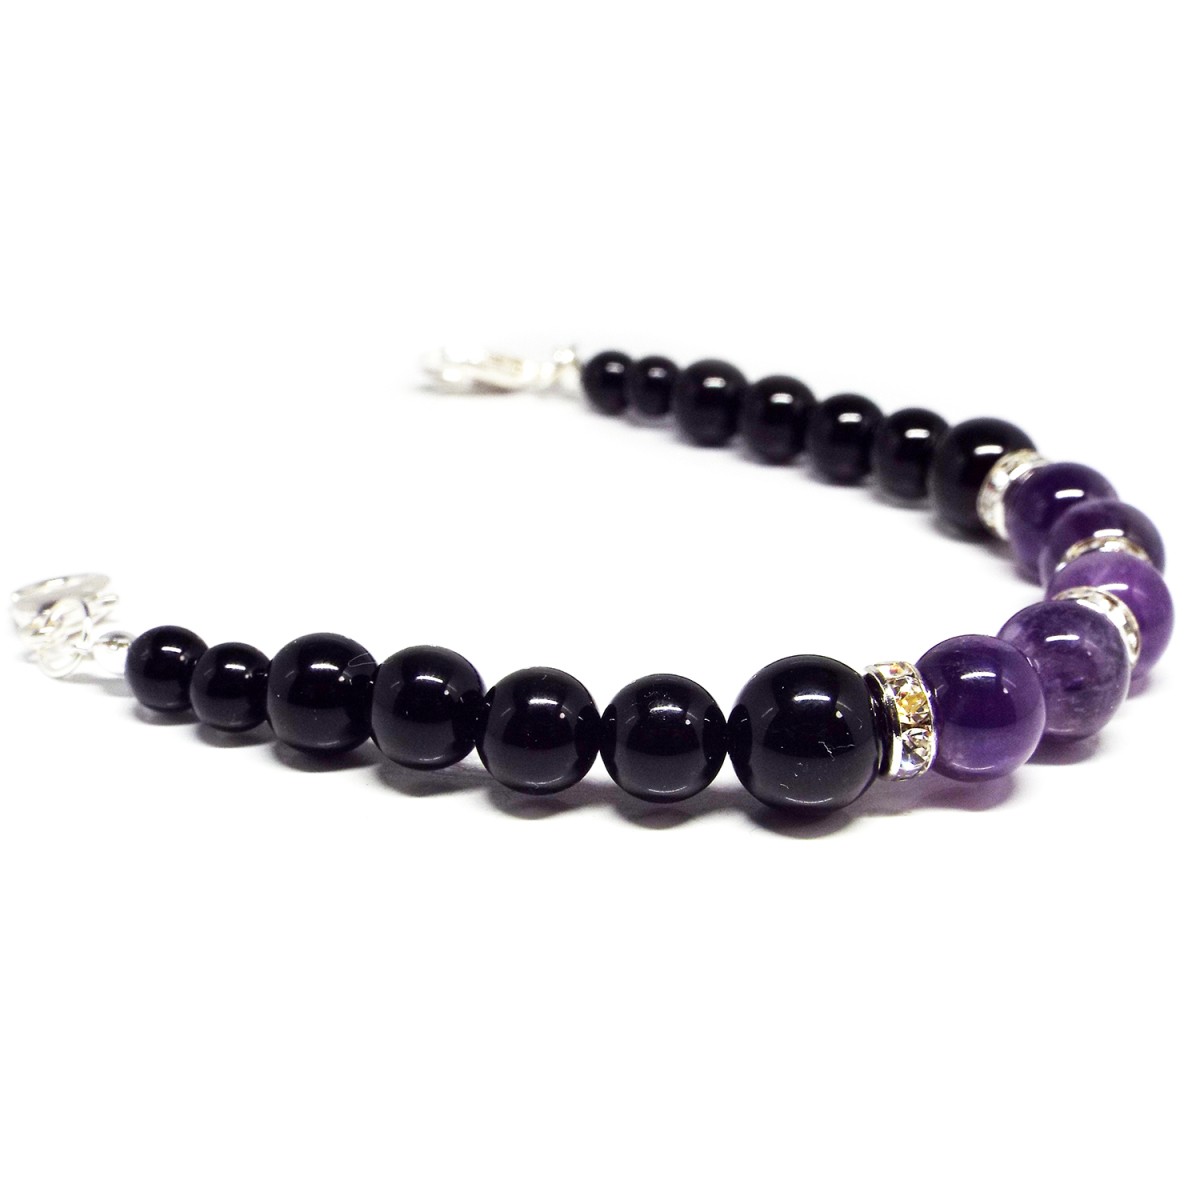  natural stone Power Stone feather woven cord kimono small articles dressing accessories amethyst onyx 